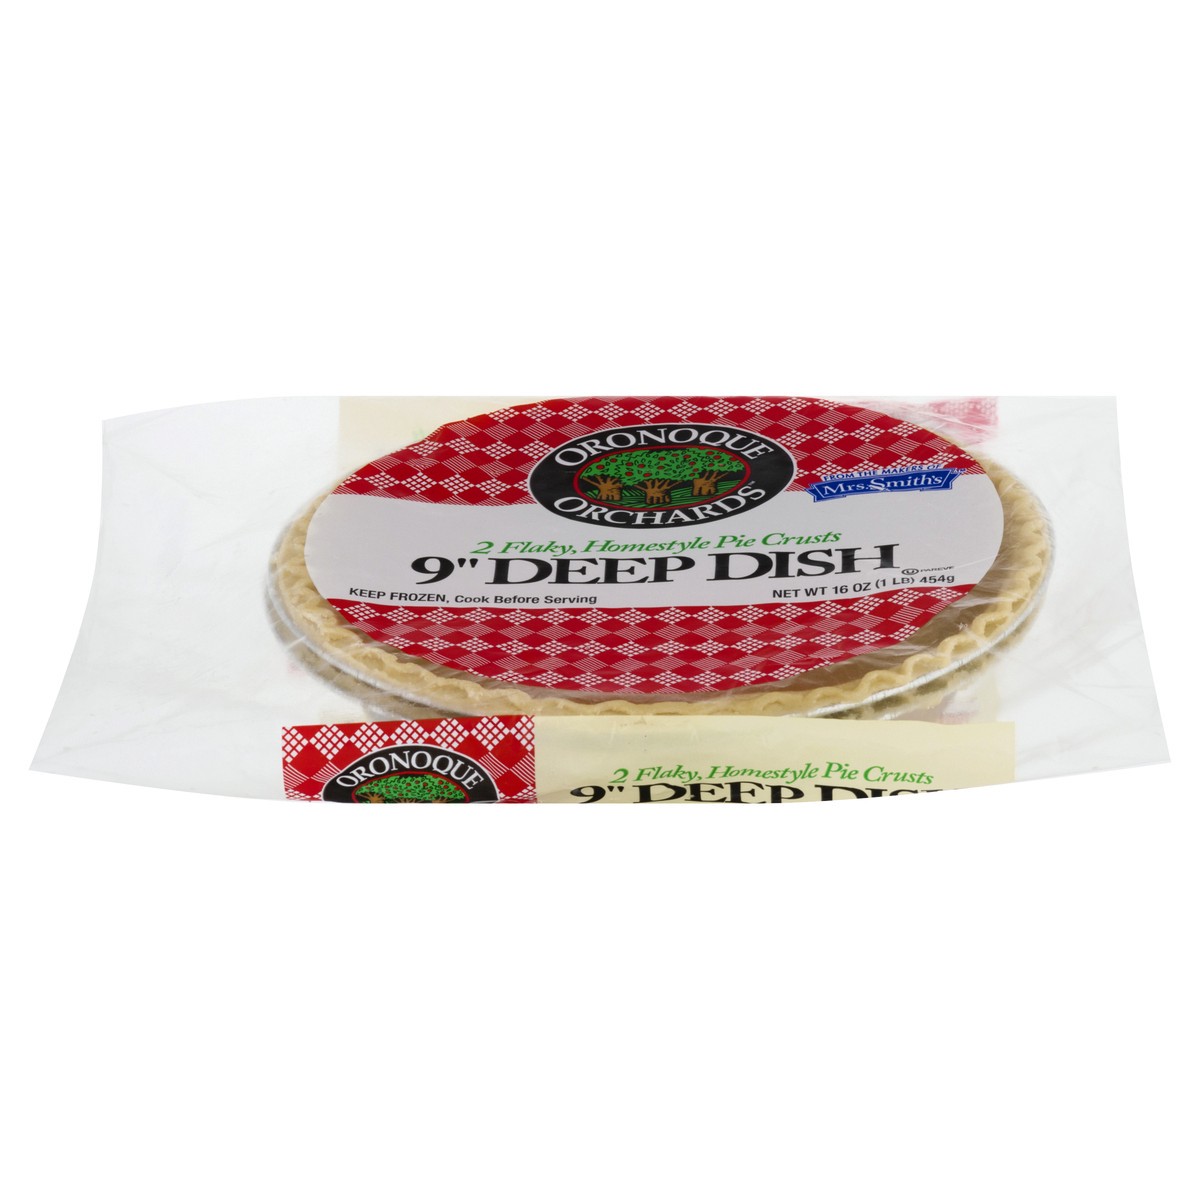 slide 1 of 9, ORONOQUE ORCHARDS 9 Inch Deep Dish Pie Crusts 2 ea, 2 ct